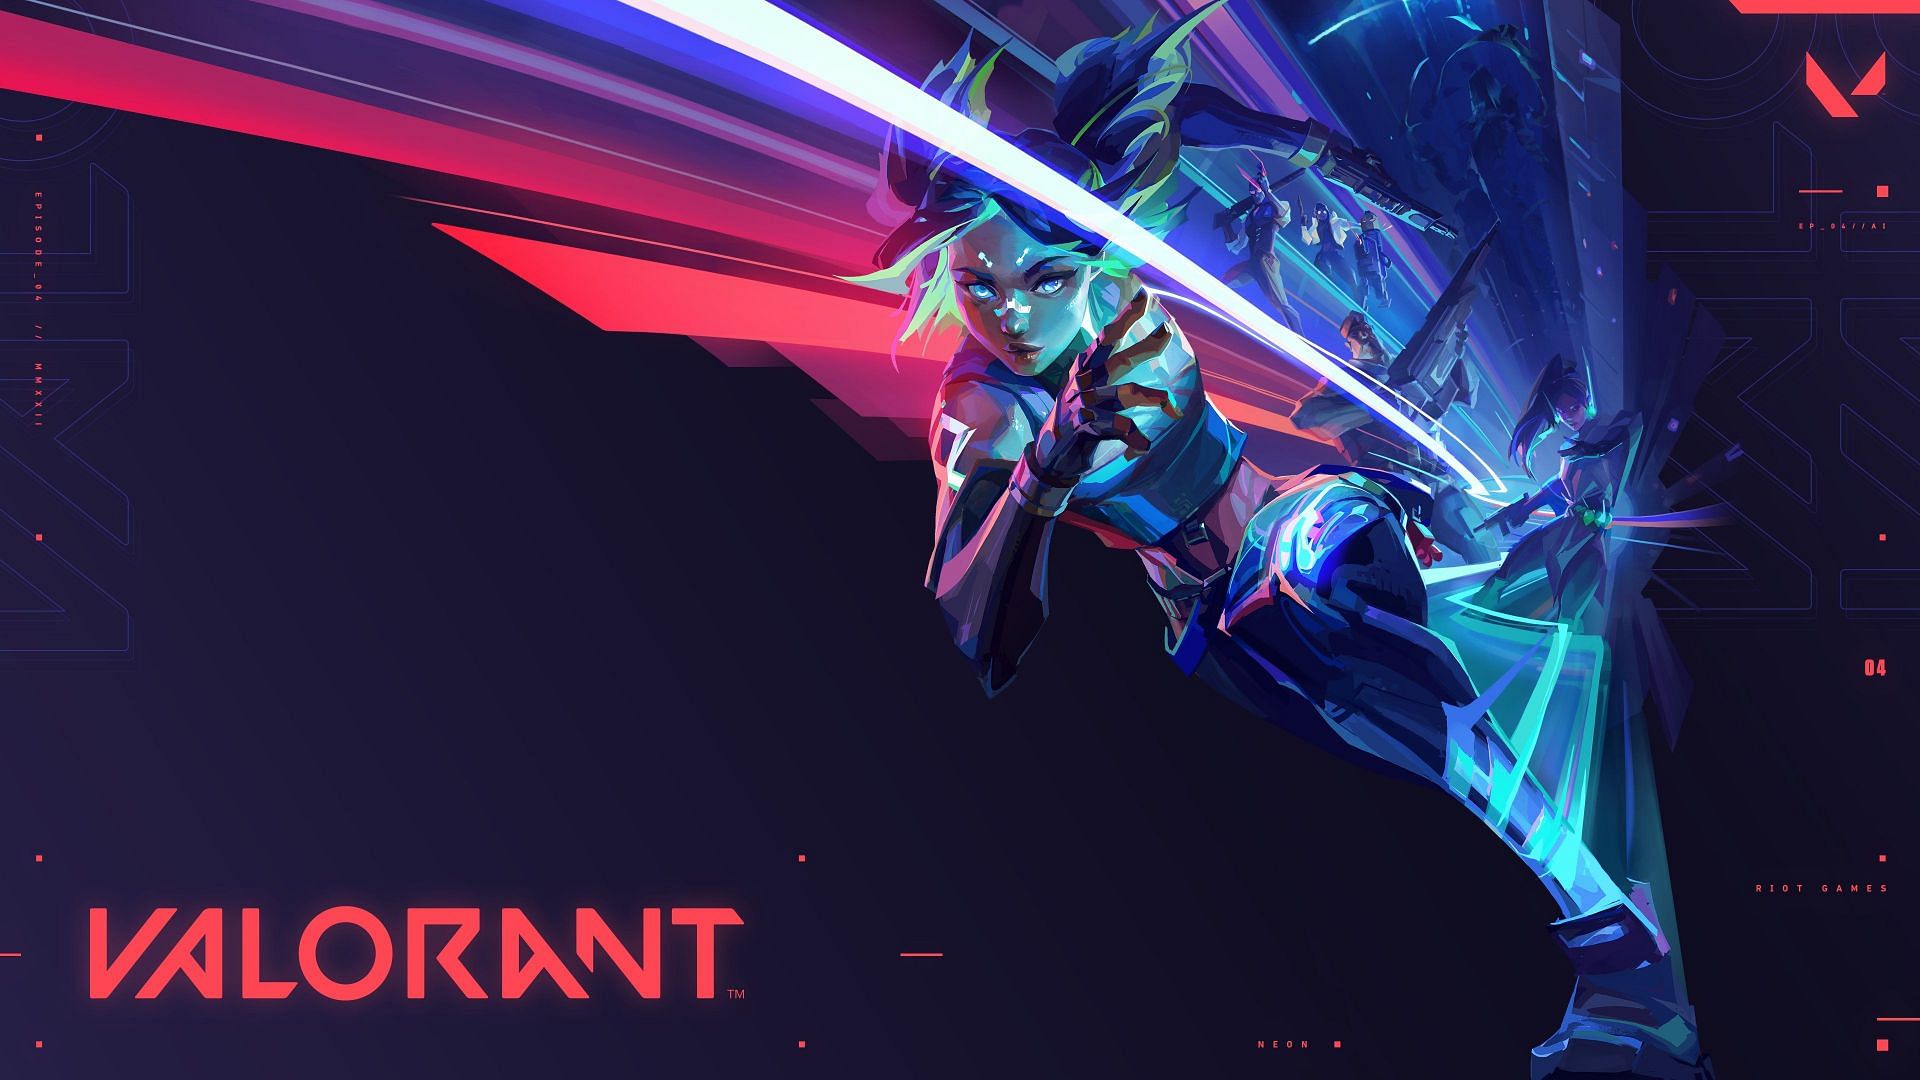 Valorant Episode 4 Act 3 came out a few weeks back (Image via Riot Games)